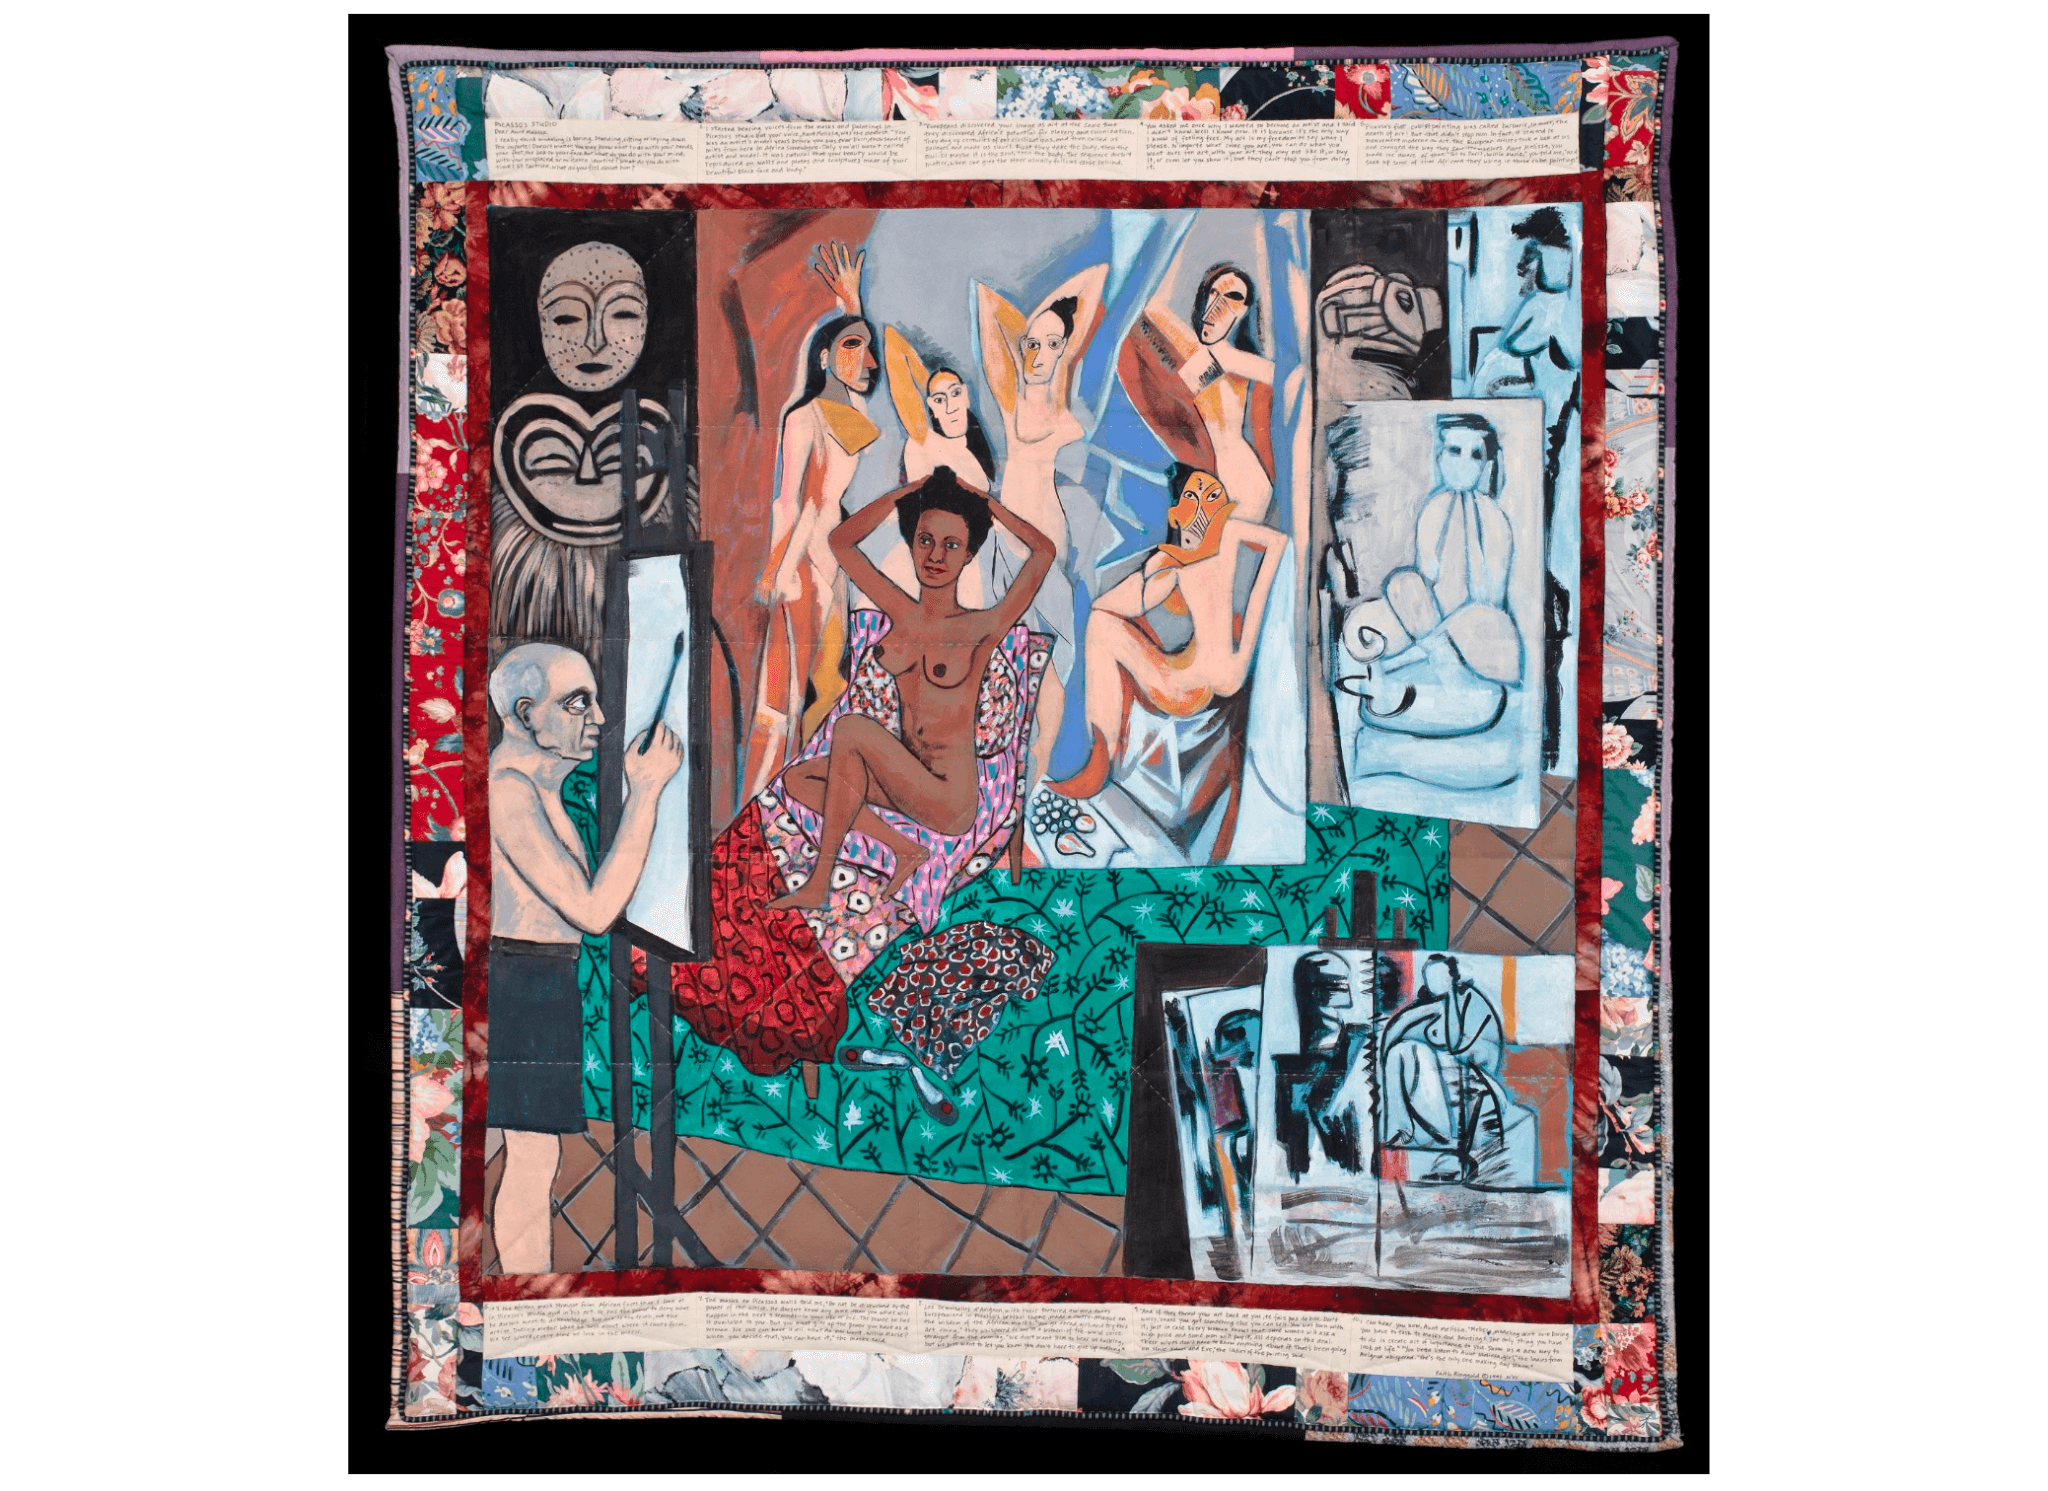 Image of "Picasso’s Studio" quilt by Faith Ringgold.